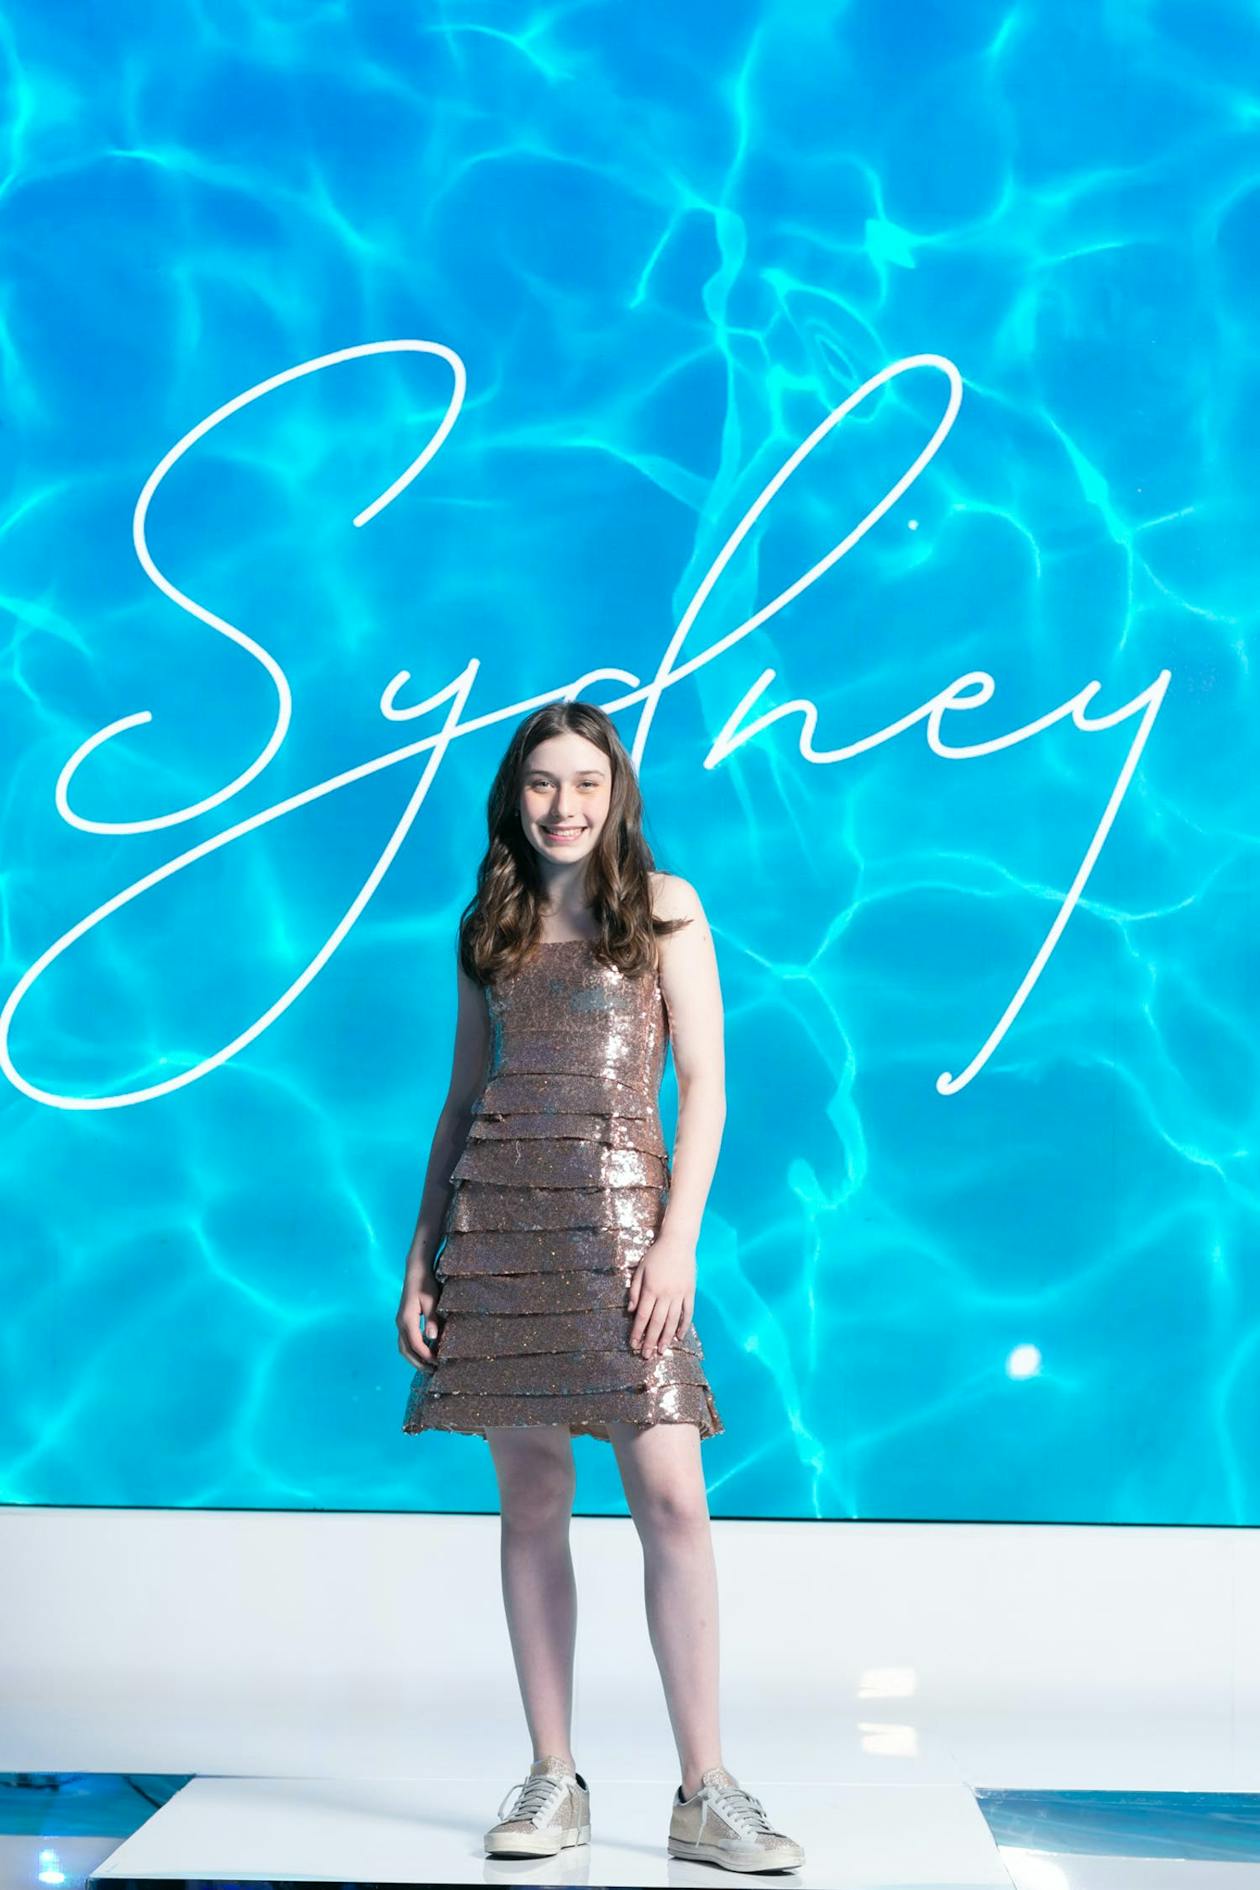 Indoor Underwater Pool Party With Blue Colors Scheme and Pool Party Details and Birthday Girl Standing In Front Of Personalized Name Sign | PartySlate